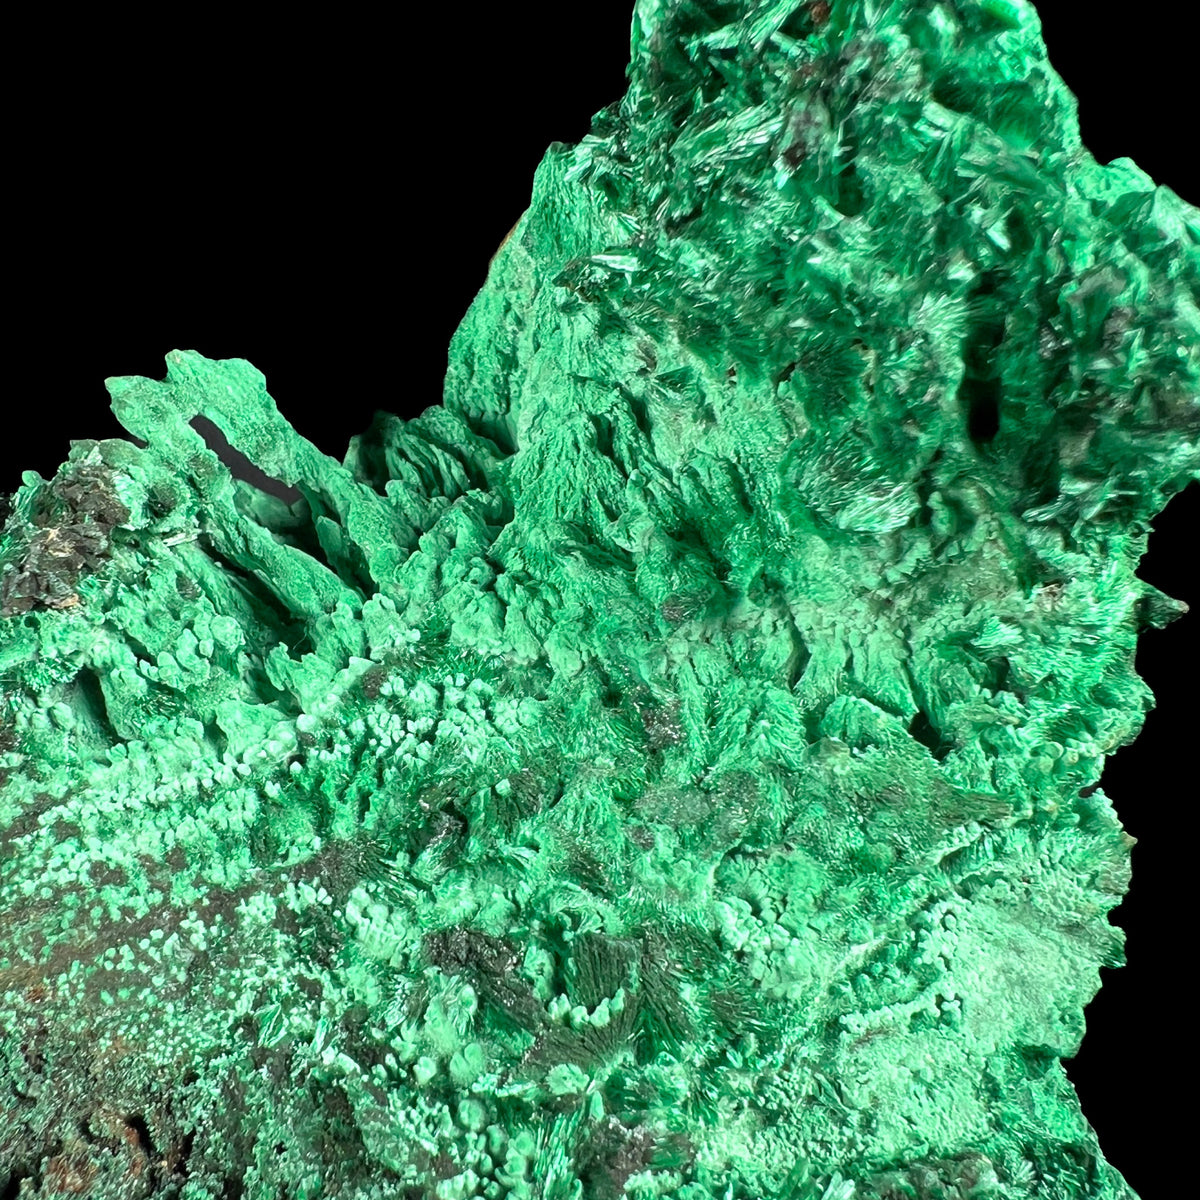 Close-Up of Fibrous Malachite Crystals